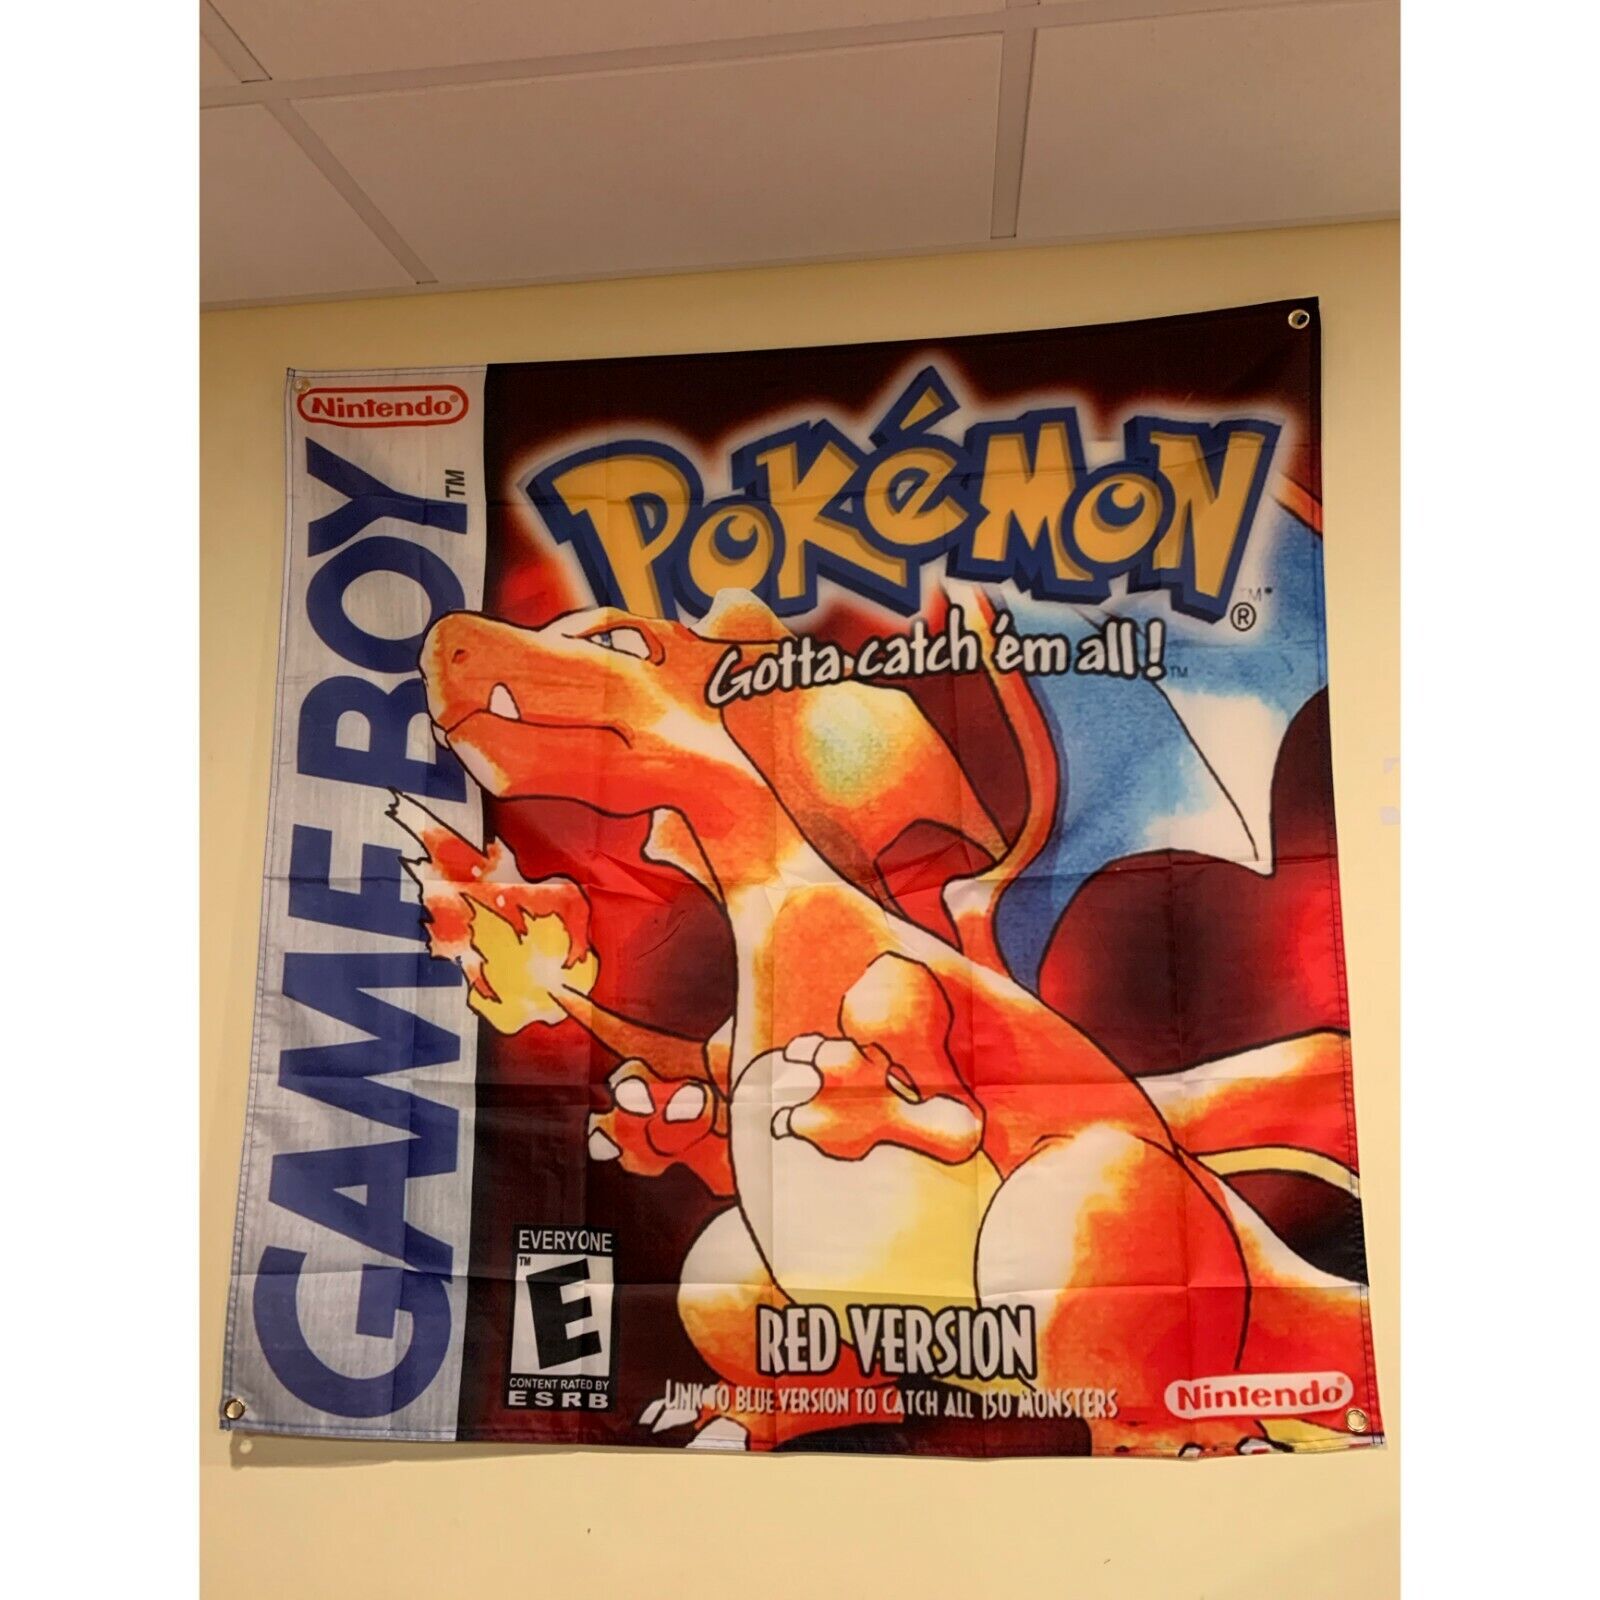 Pokemon Red Version Charizard Gameboy Art Wall Flag Banner Tapestry 3.5 x 3.5 Ft